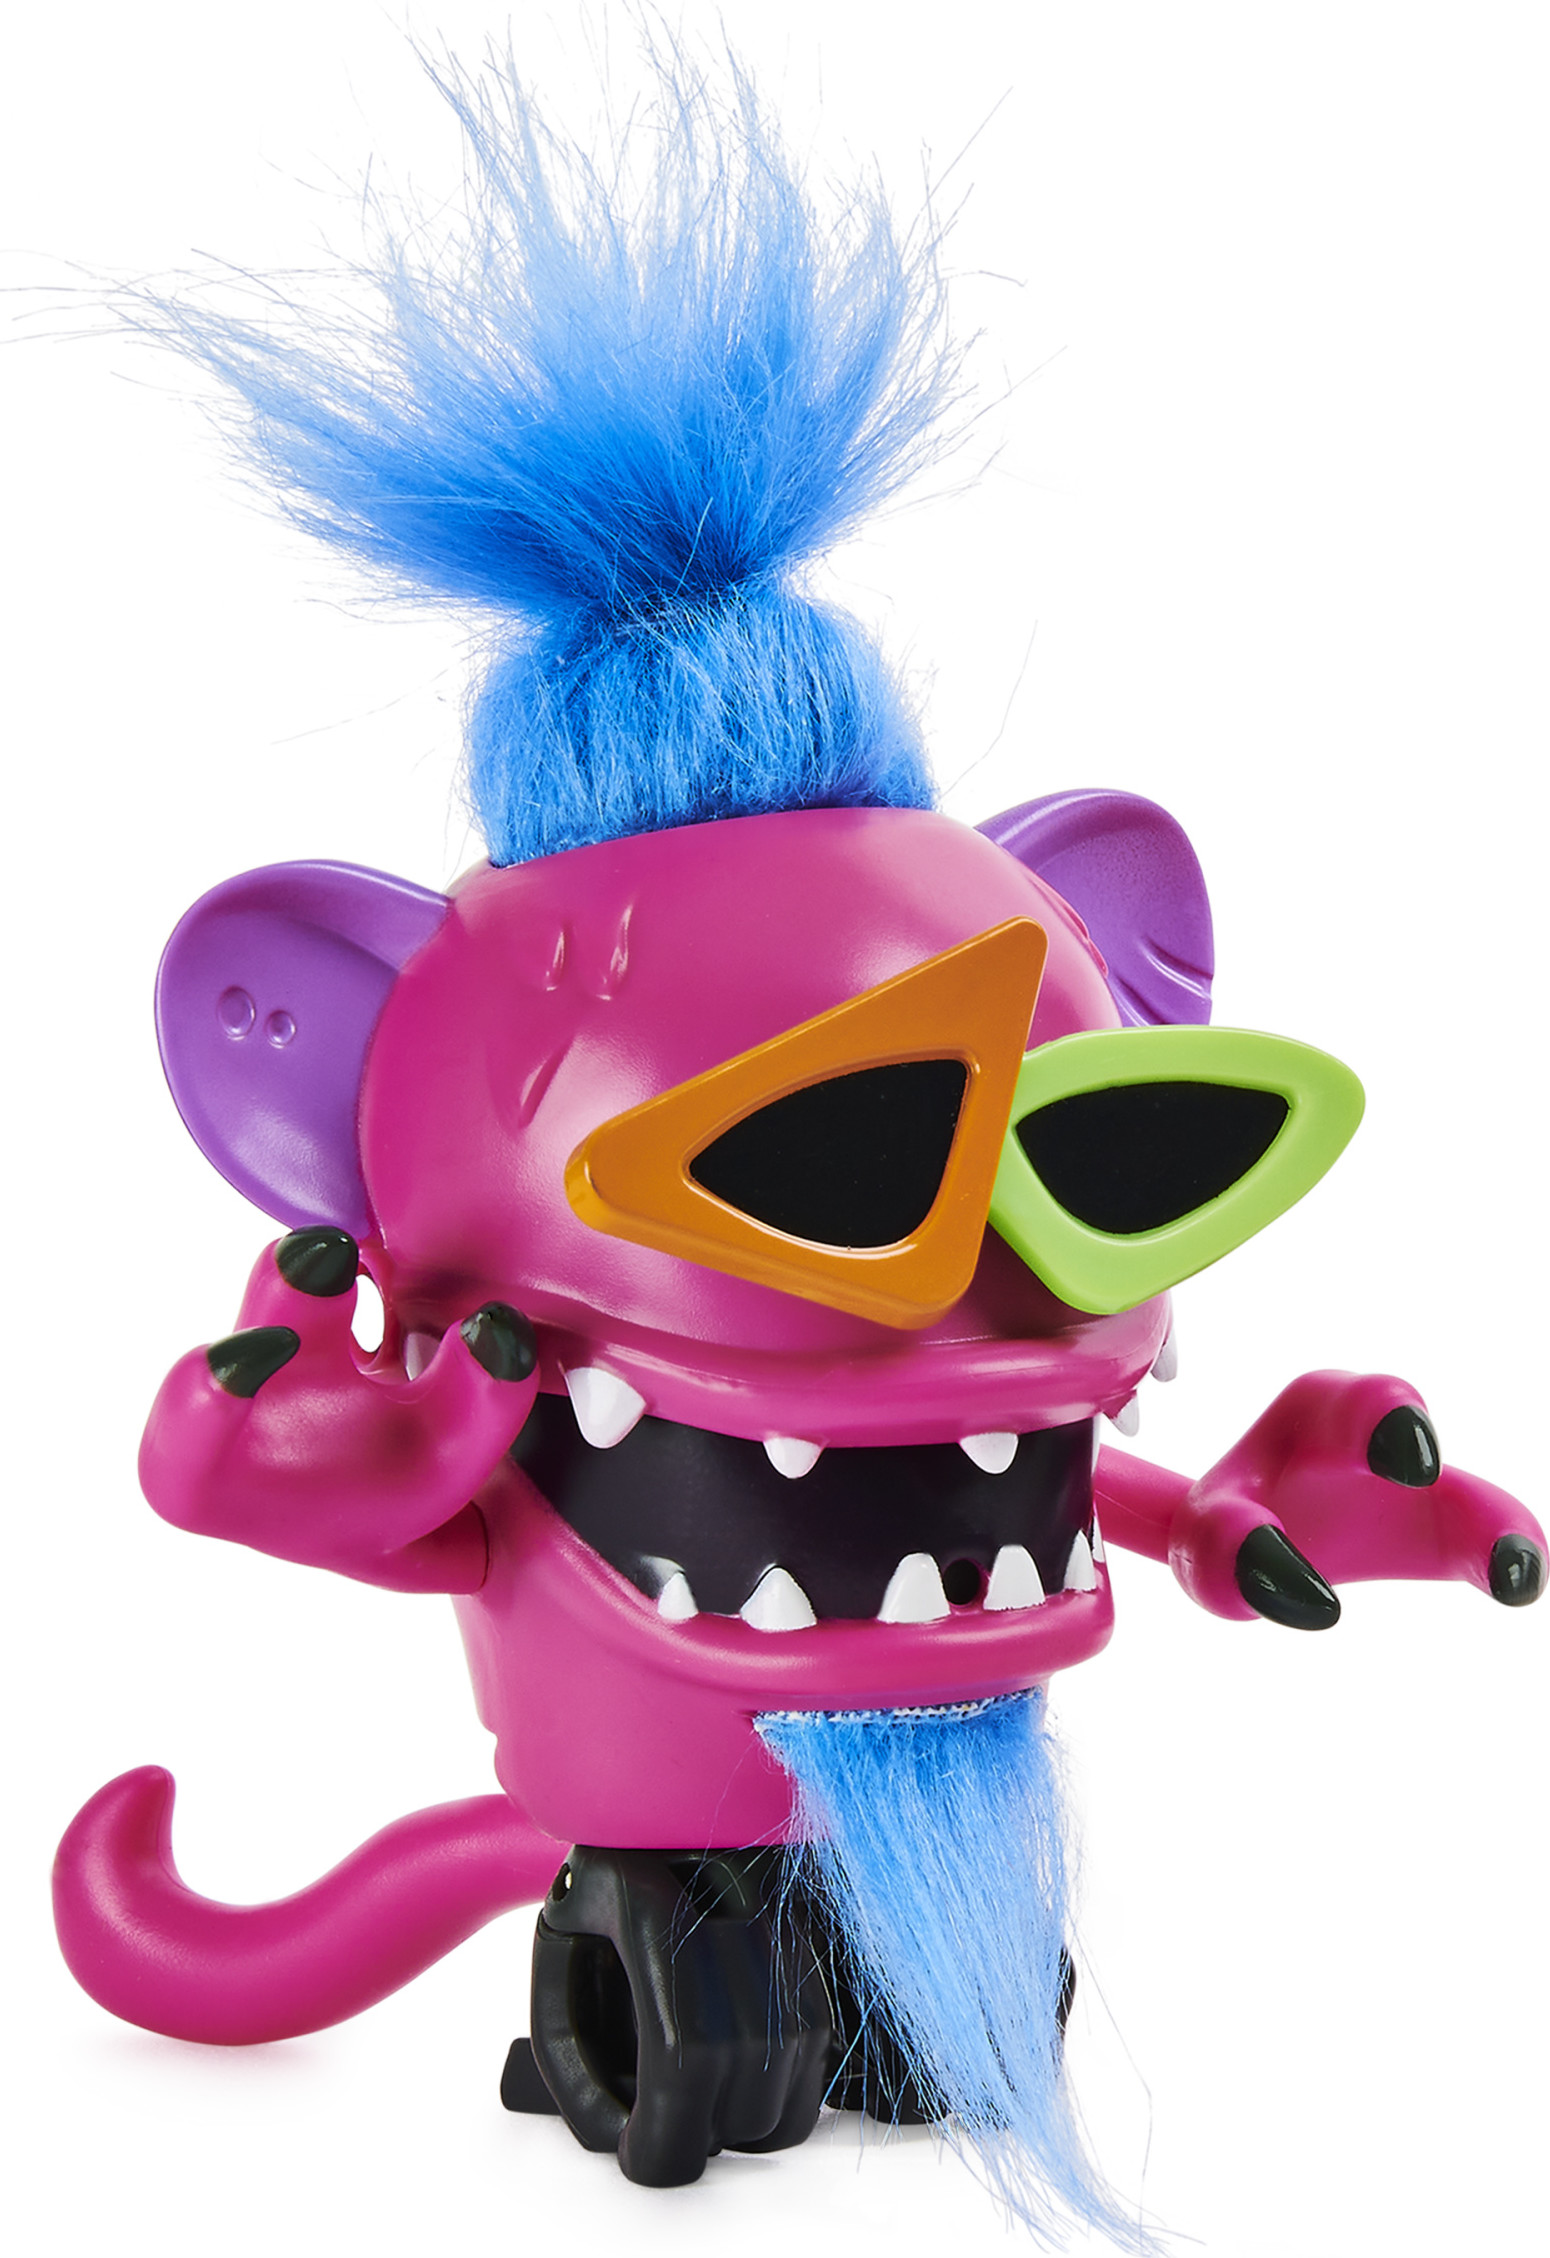 Scritterz, Bonoboz Interactive Collectible Jungle Creature Toy with Sounds and Movement, for Kids Aged 5 and up - image 5 of 8